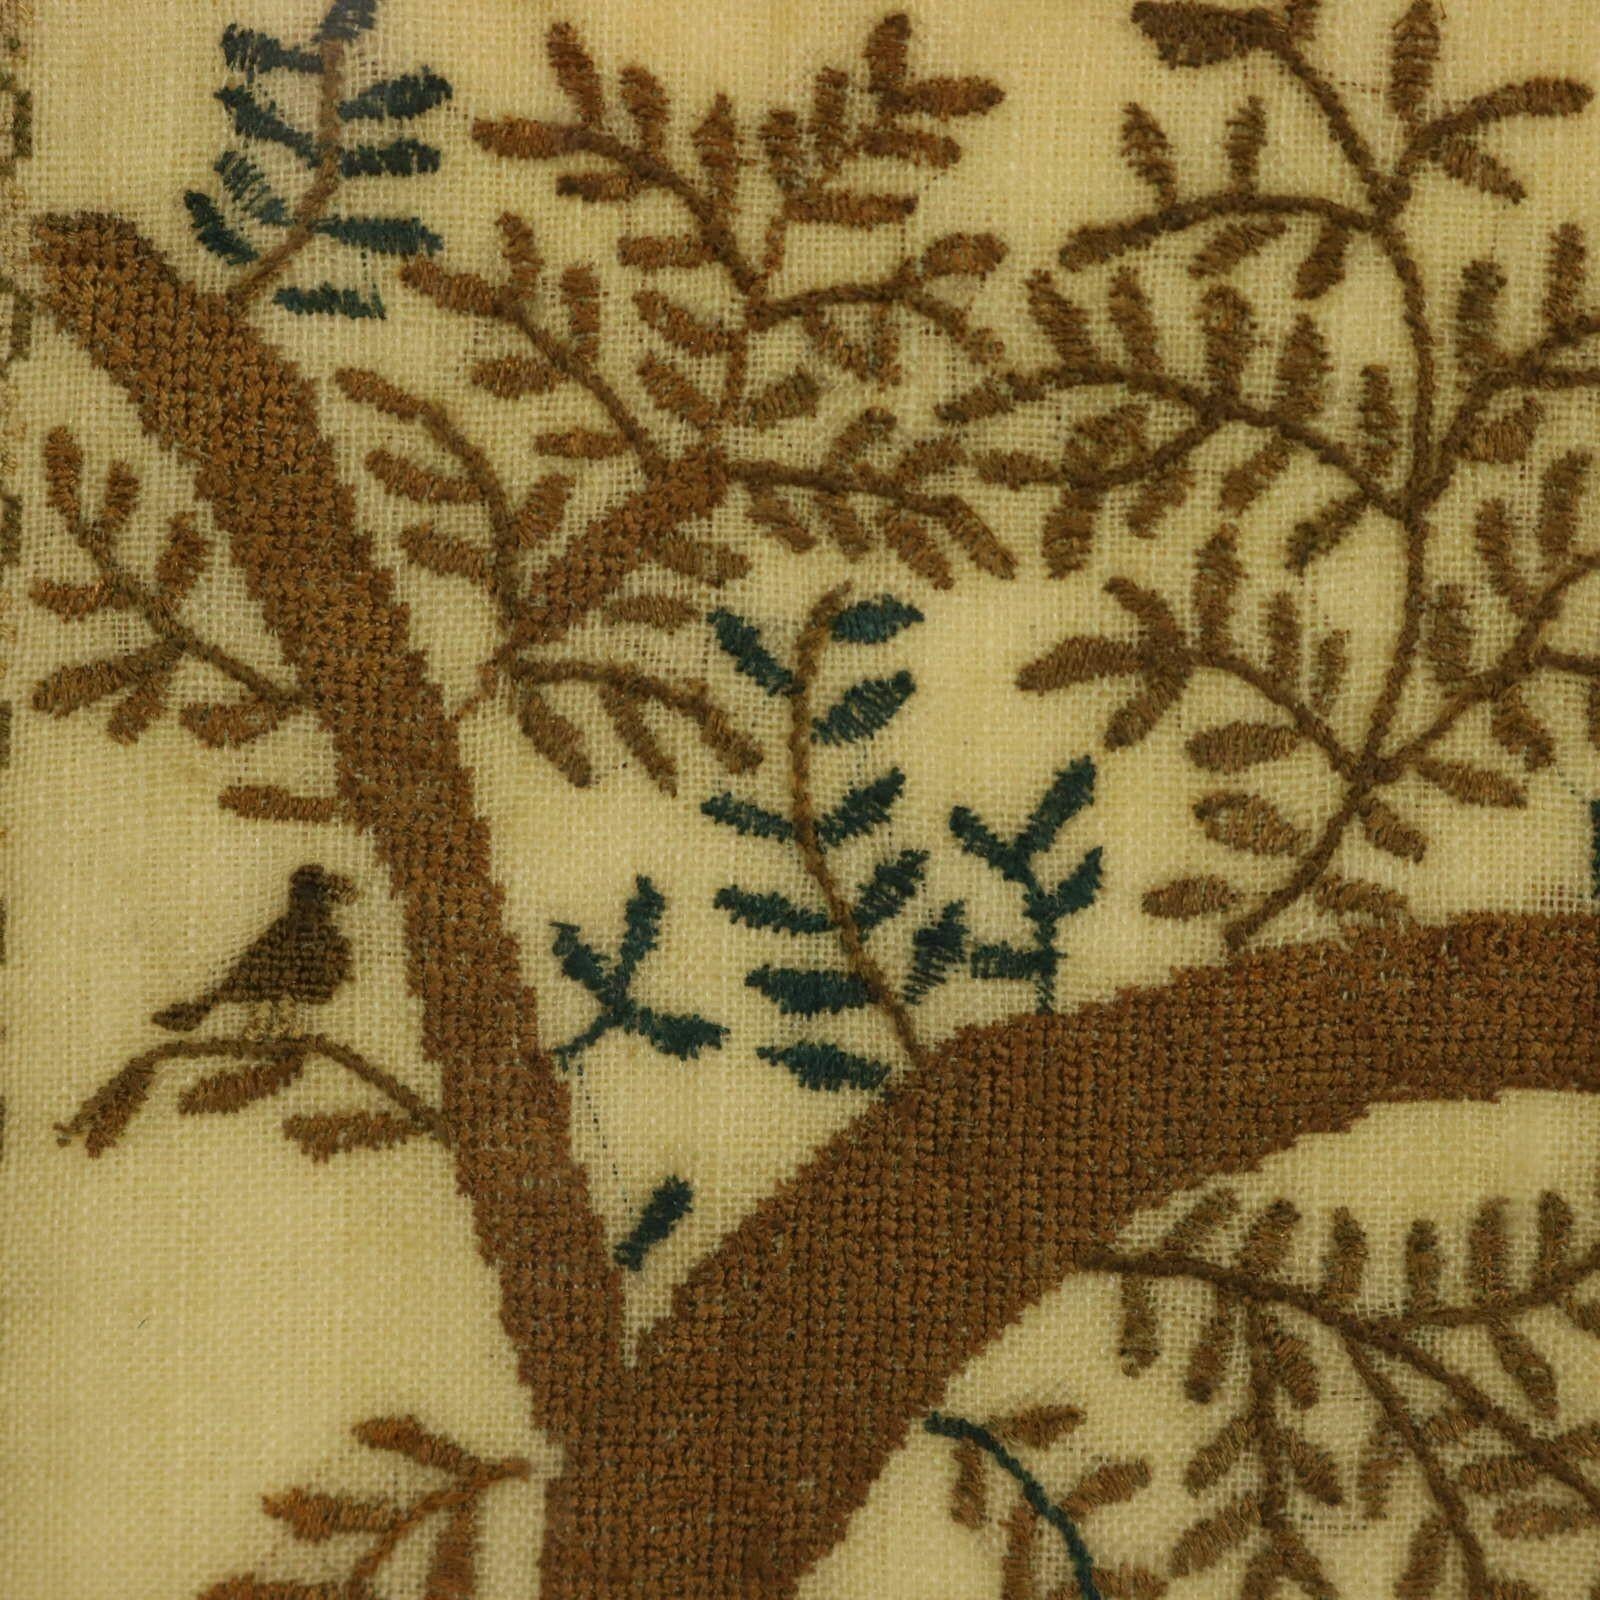 Linen Antique Sampler, 1824, by Mary Richards aged 13